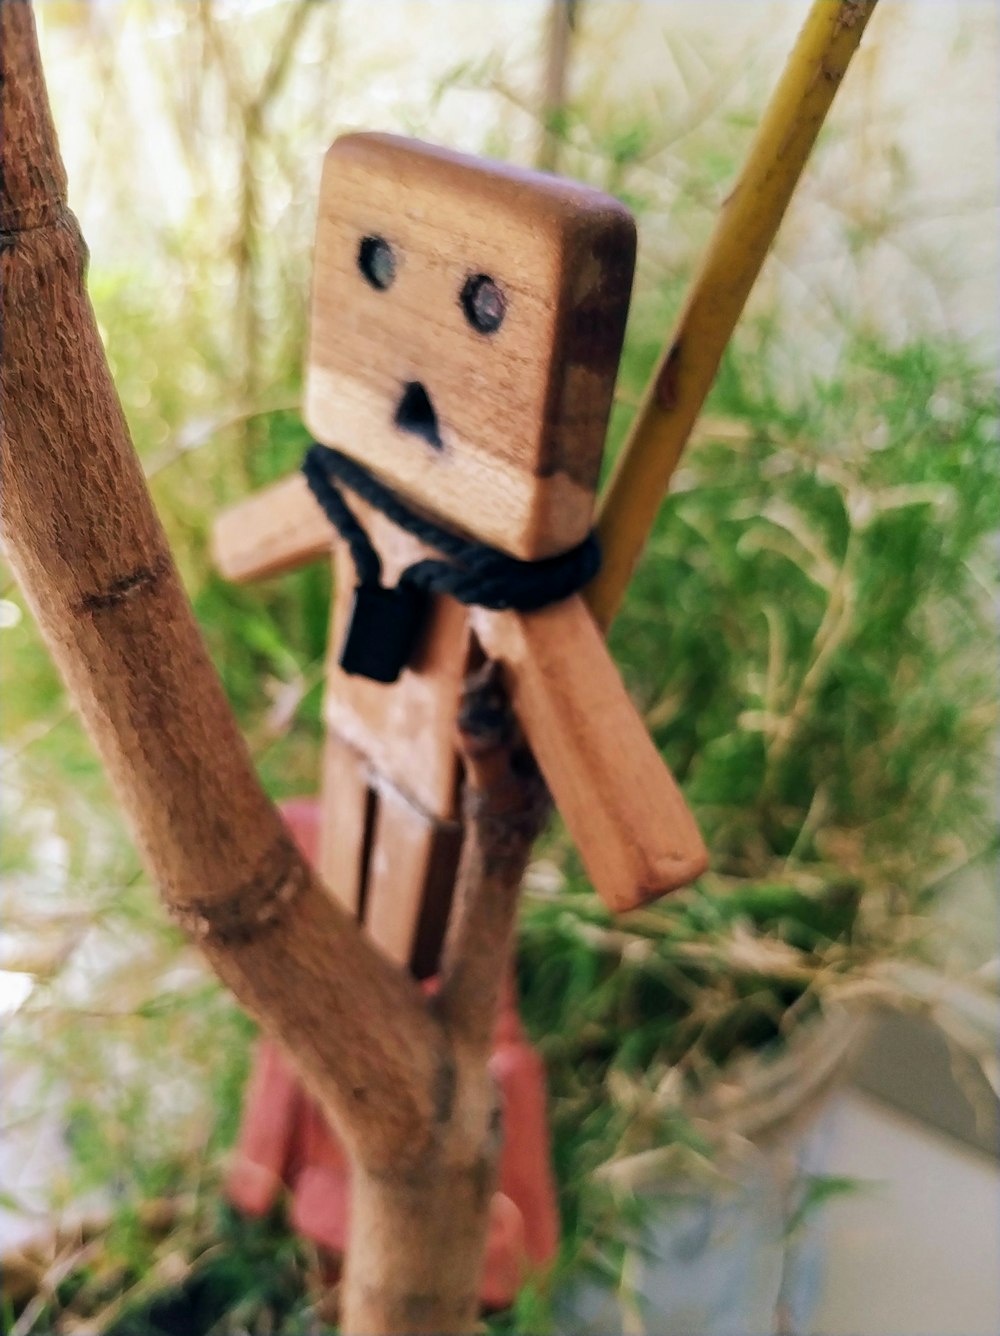 brown wooden character toy on wooden twig